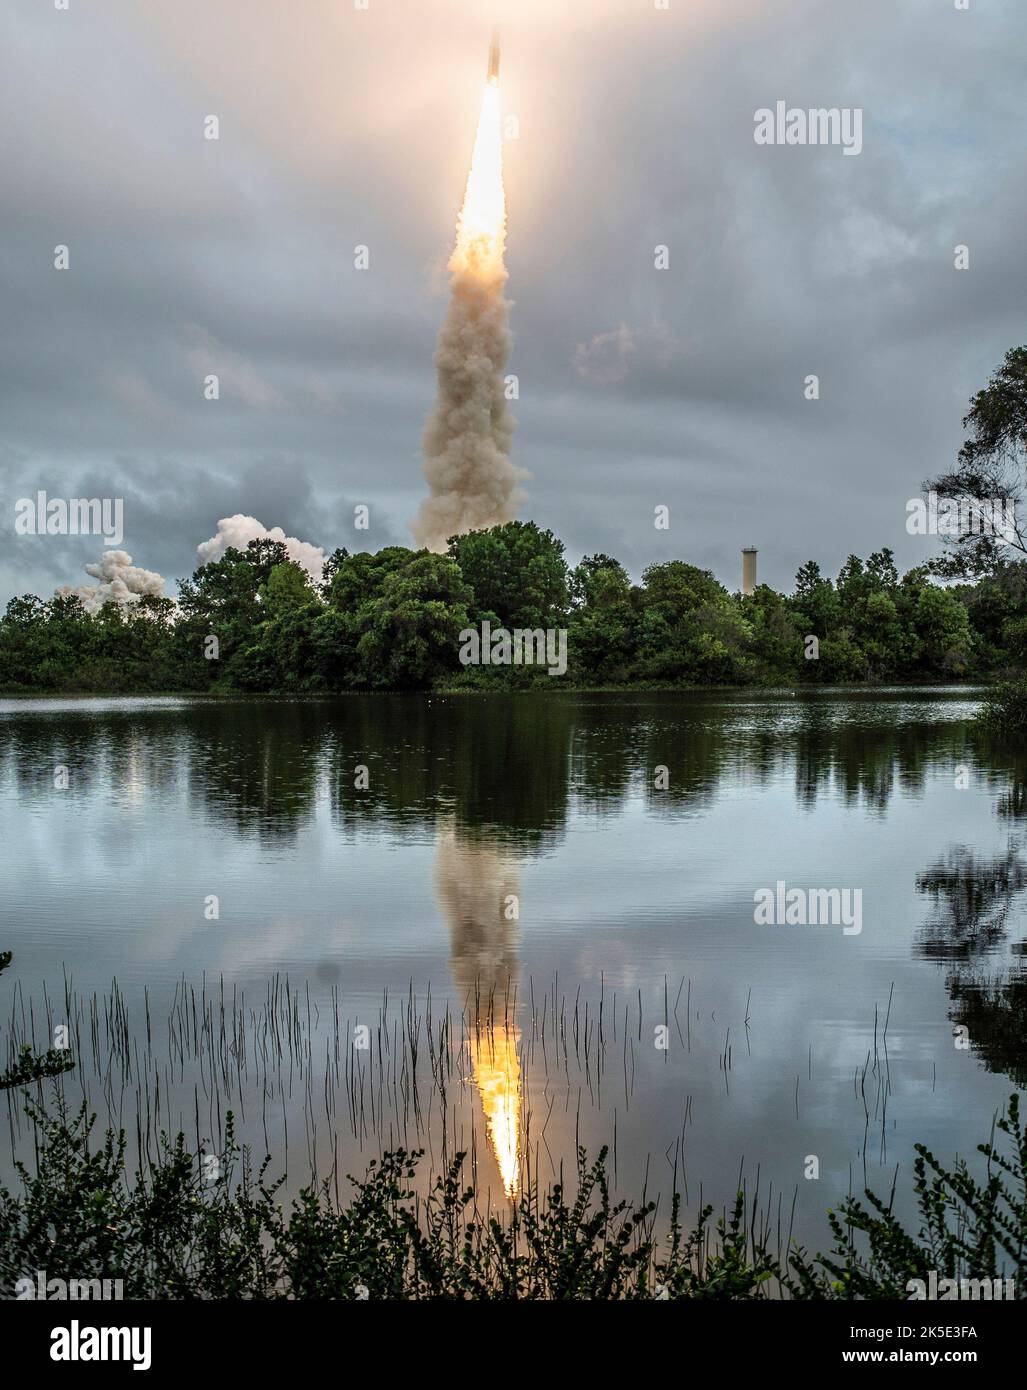 Arianespace's Ariane 5 rocket launches with NASA's James Webb Space Telescope onboard, 25 December 2021, from the ELA-3 Launch Zone of Europe's Spaceport at the Guiana Space Centre in Kourou, French Guiana. The James Webb Space Telescope (JWST or Webb for short) is a large infrared telescope with a 21.3 foot (6.5 meter) primary mirror. The observatory will study every phase of cosmic historyÑfrom within our solar system to the most distant observable galaxies in the early universe.  An optimised version of a NASA image by experienced lead photographer Chris Gunn. Credit: NASA/Chris Gunn. Stock Photo